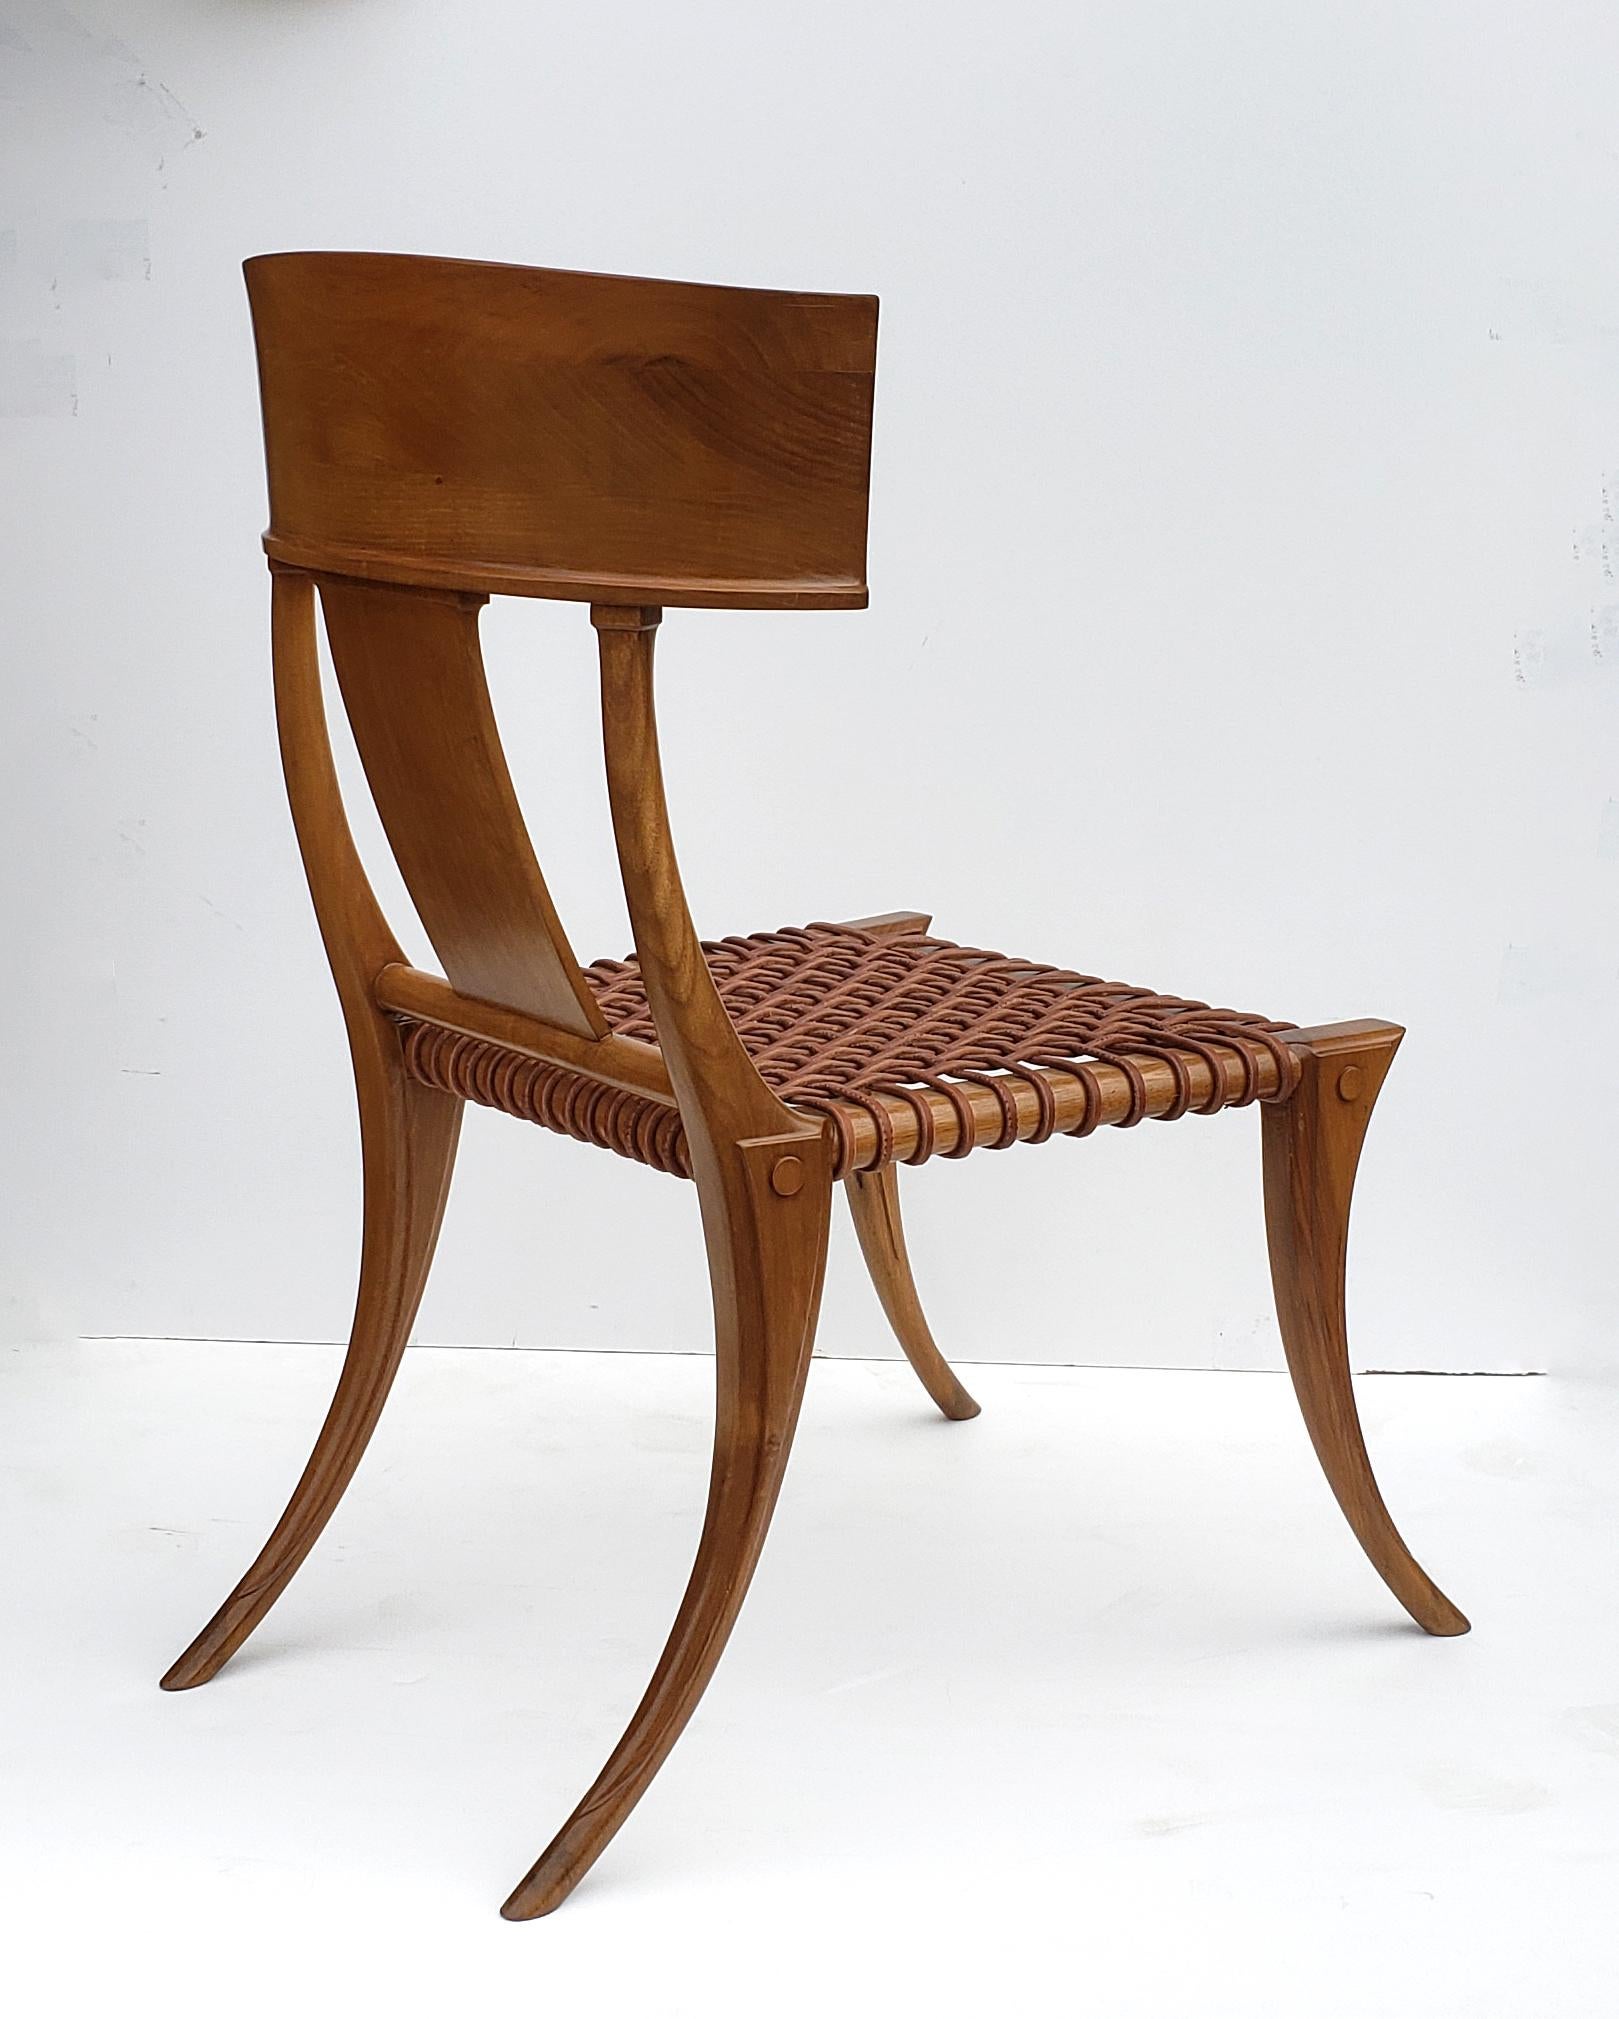 T.H. Robsjohn-Gibbings Klismos Chair for Saridis of Athens in Walnut and Leather 1